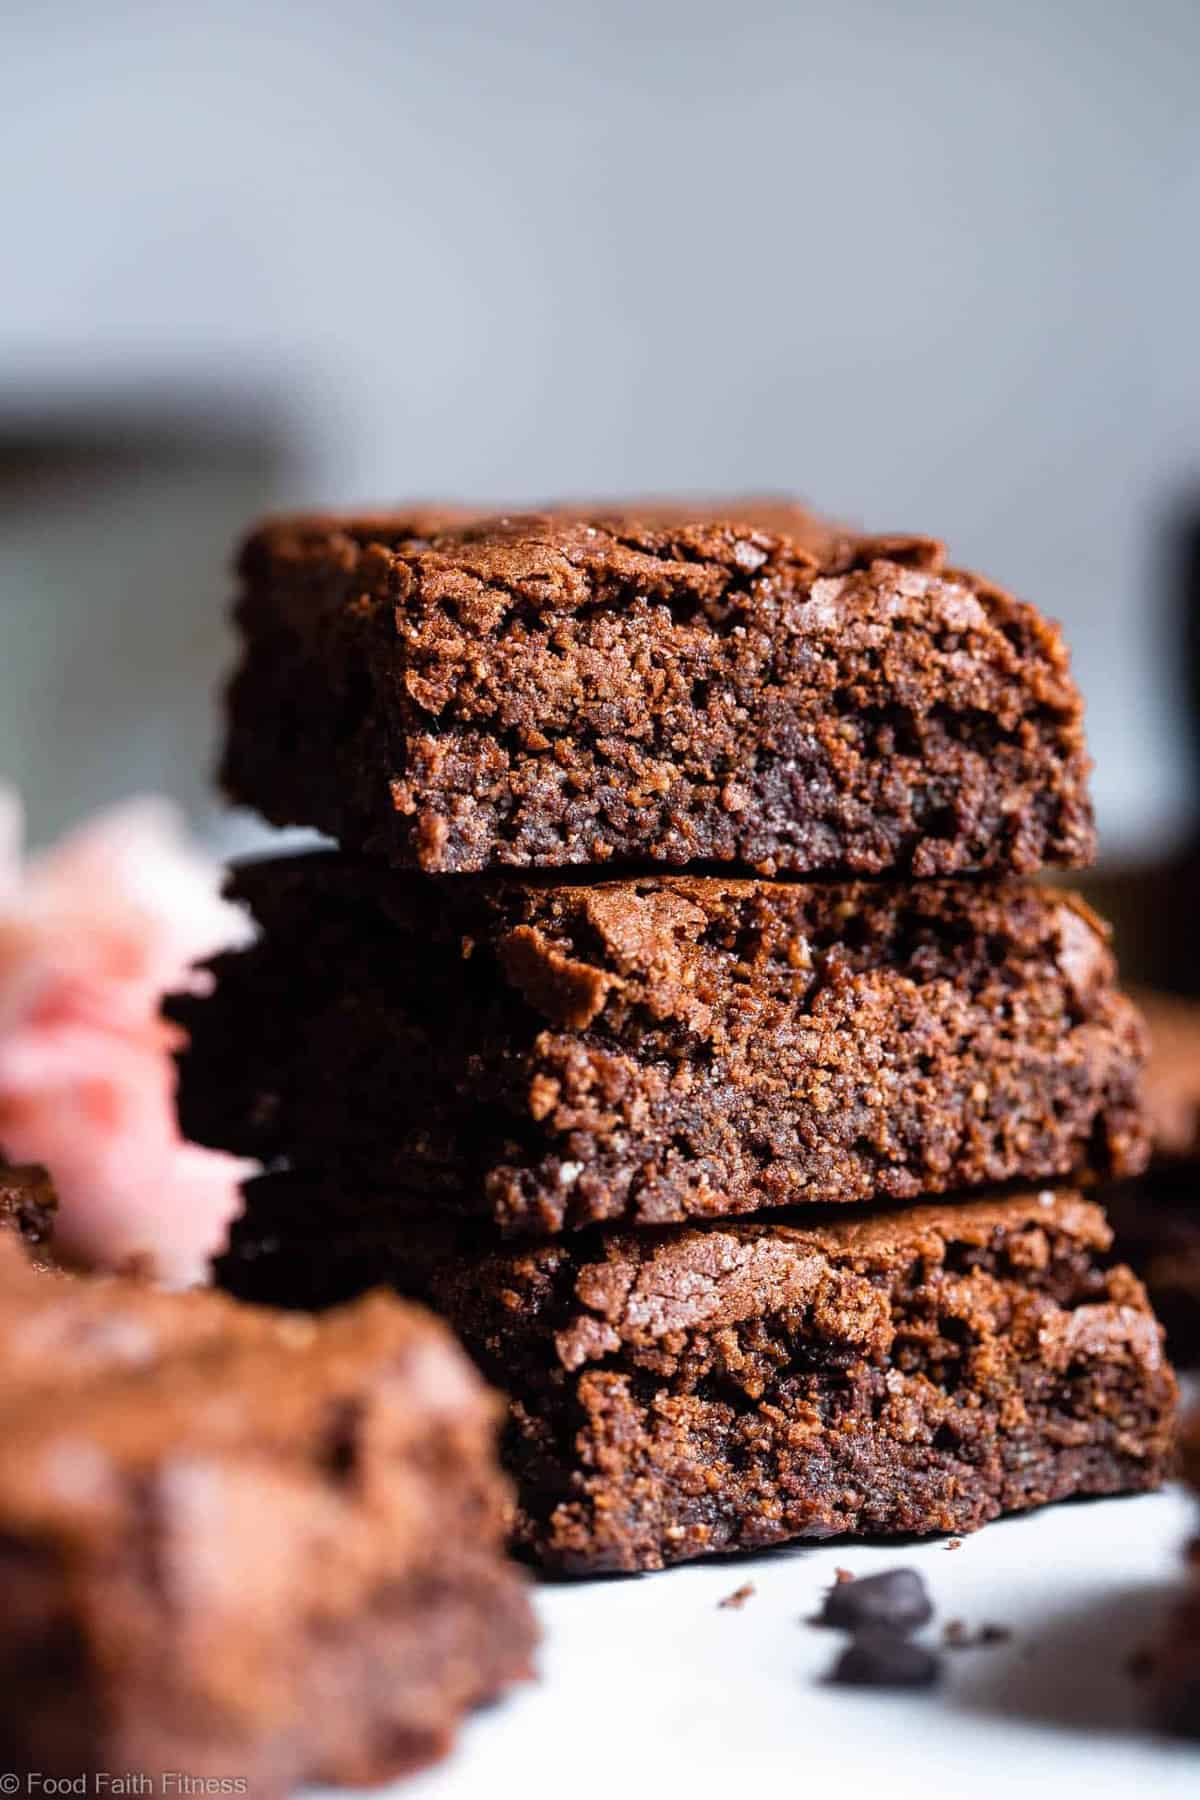 Easy Gluten Free Dairy Free Brownies - These grain free, healthy brownies come together in less than an hour and are SO dense, chewy and FUDGY! Paleo friendly, gluten and dairy free and SO delicious! | #Foodfaithfitness | #Glutenfree #Dairyfree #Paleo #Healthy #Brownies